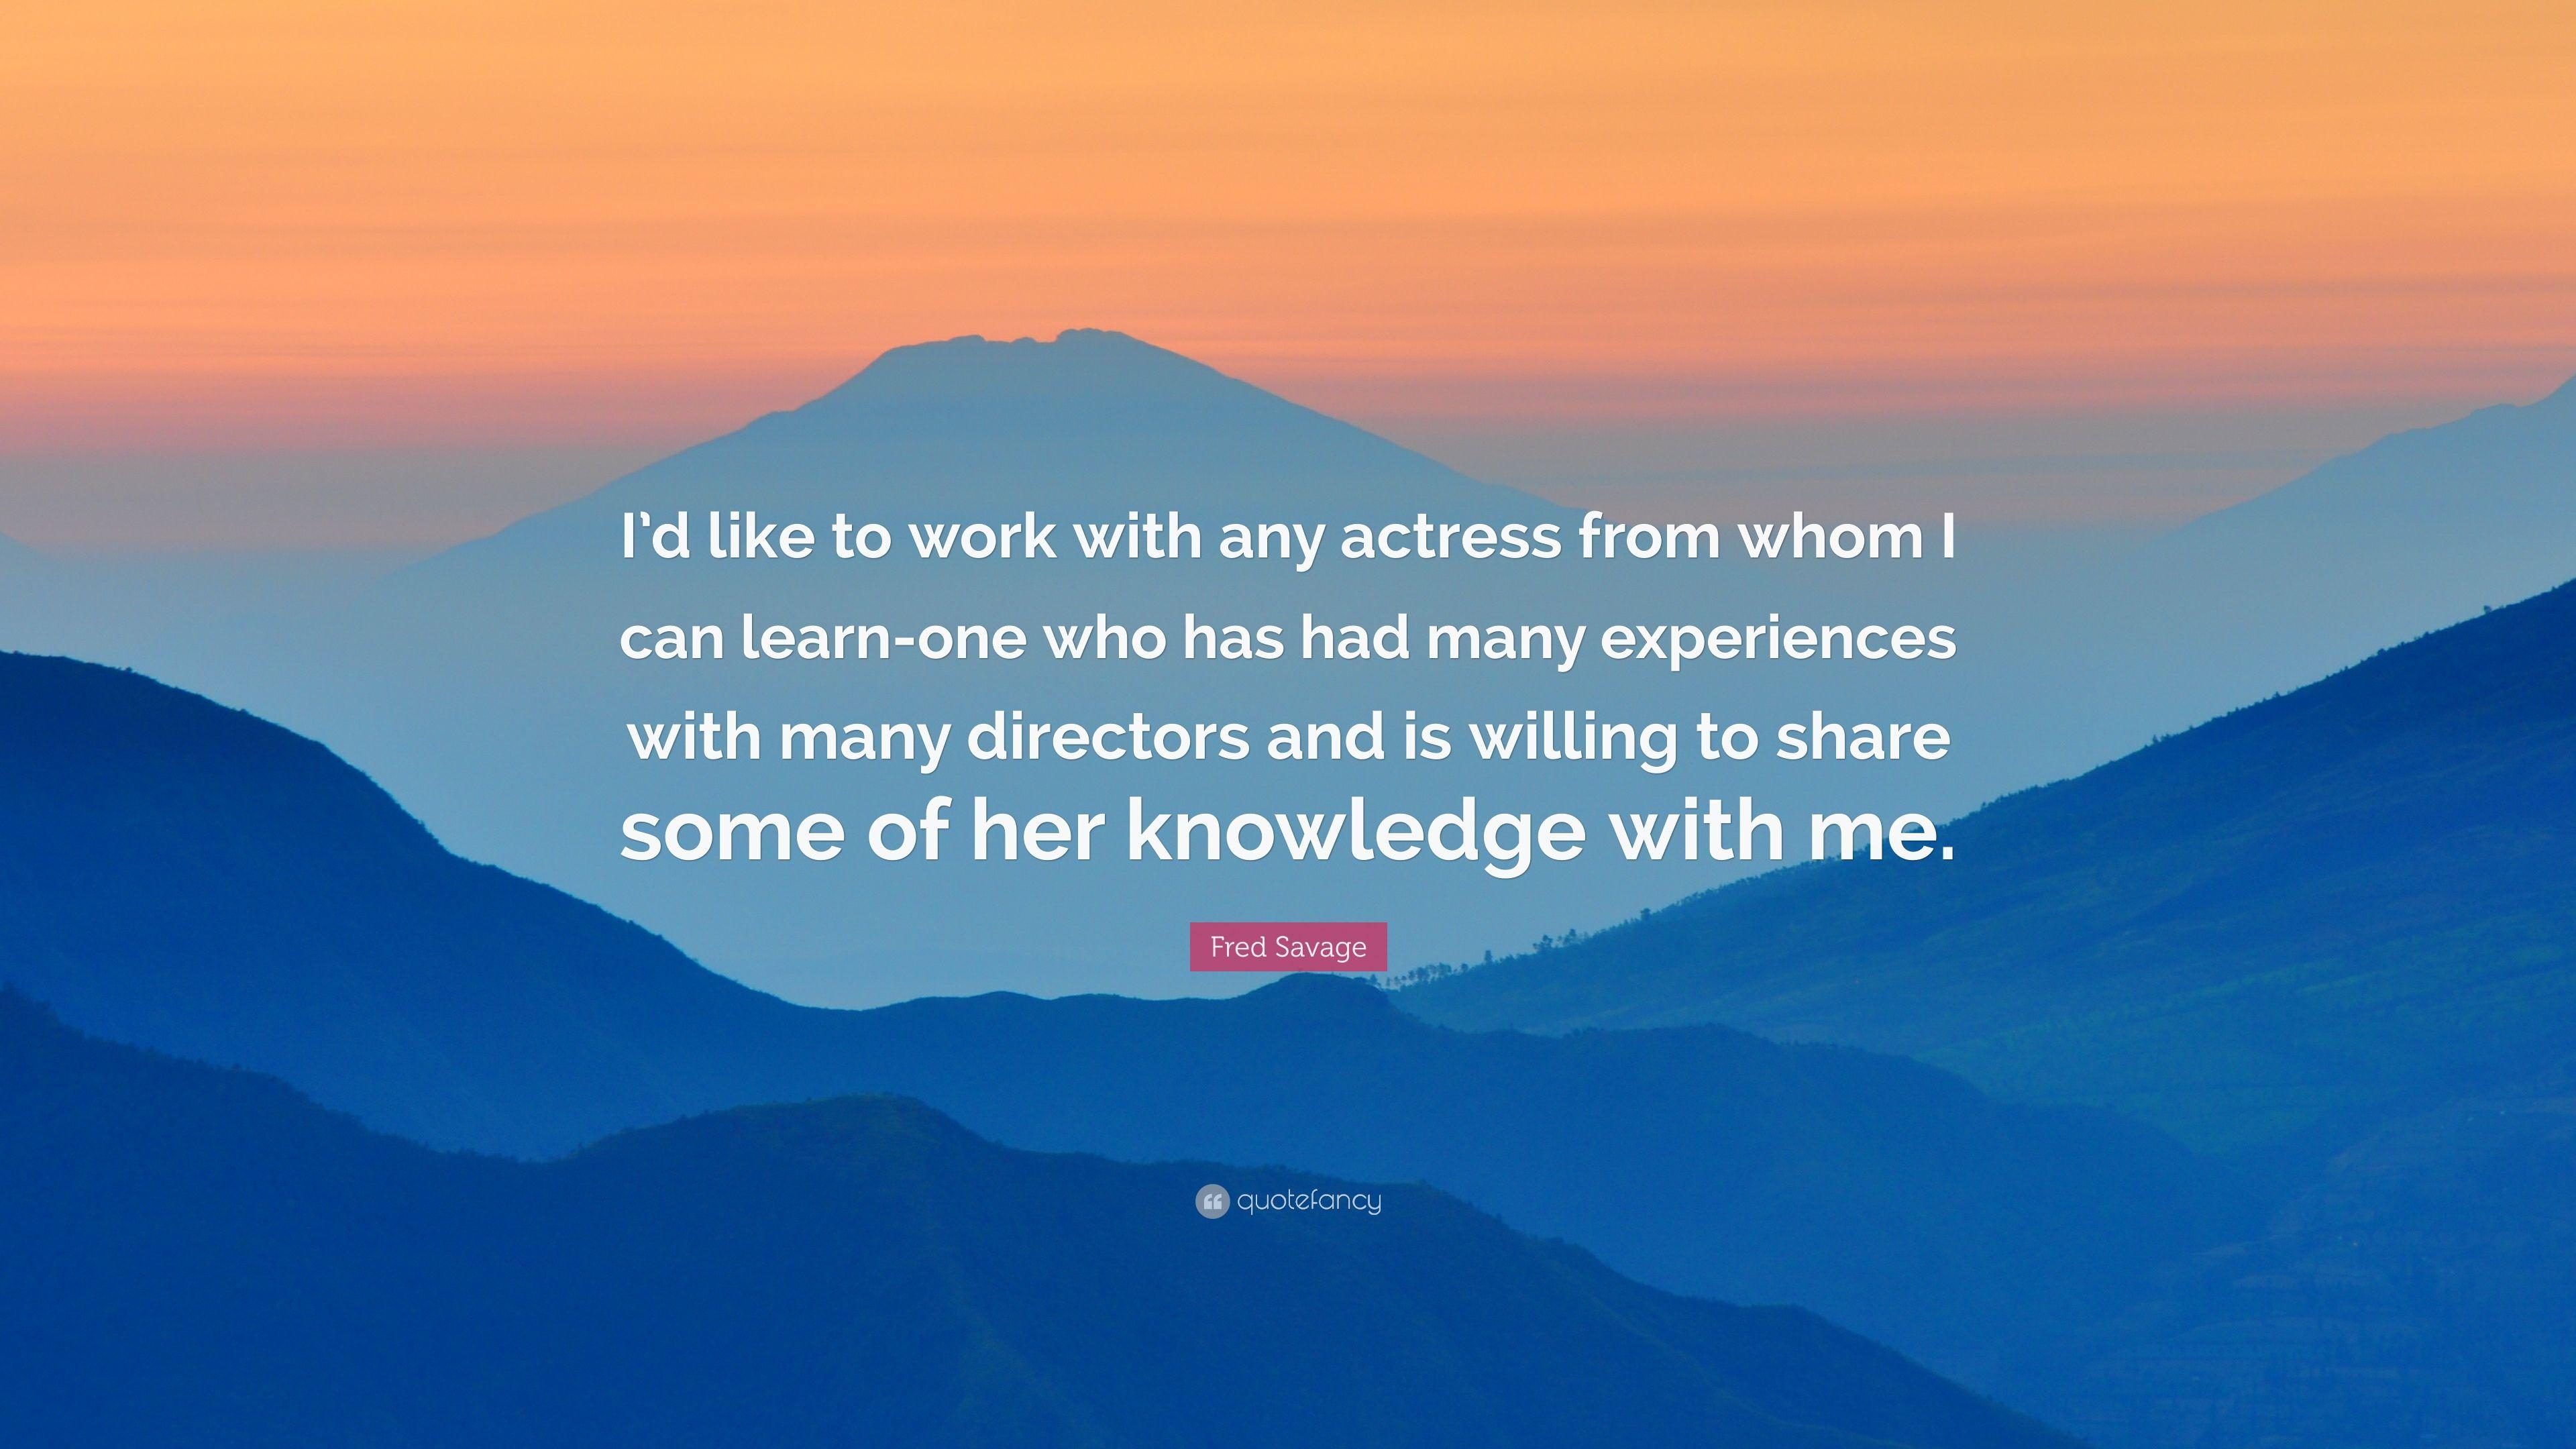 Fred Savage Quote: “I'd like to work with any actress from whom I